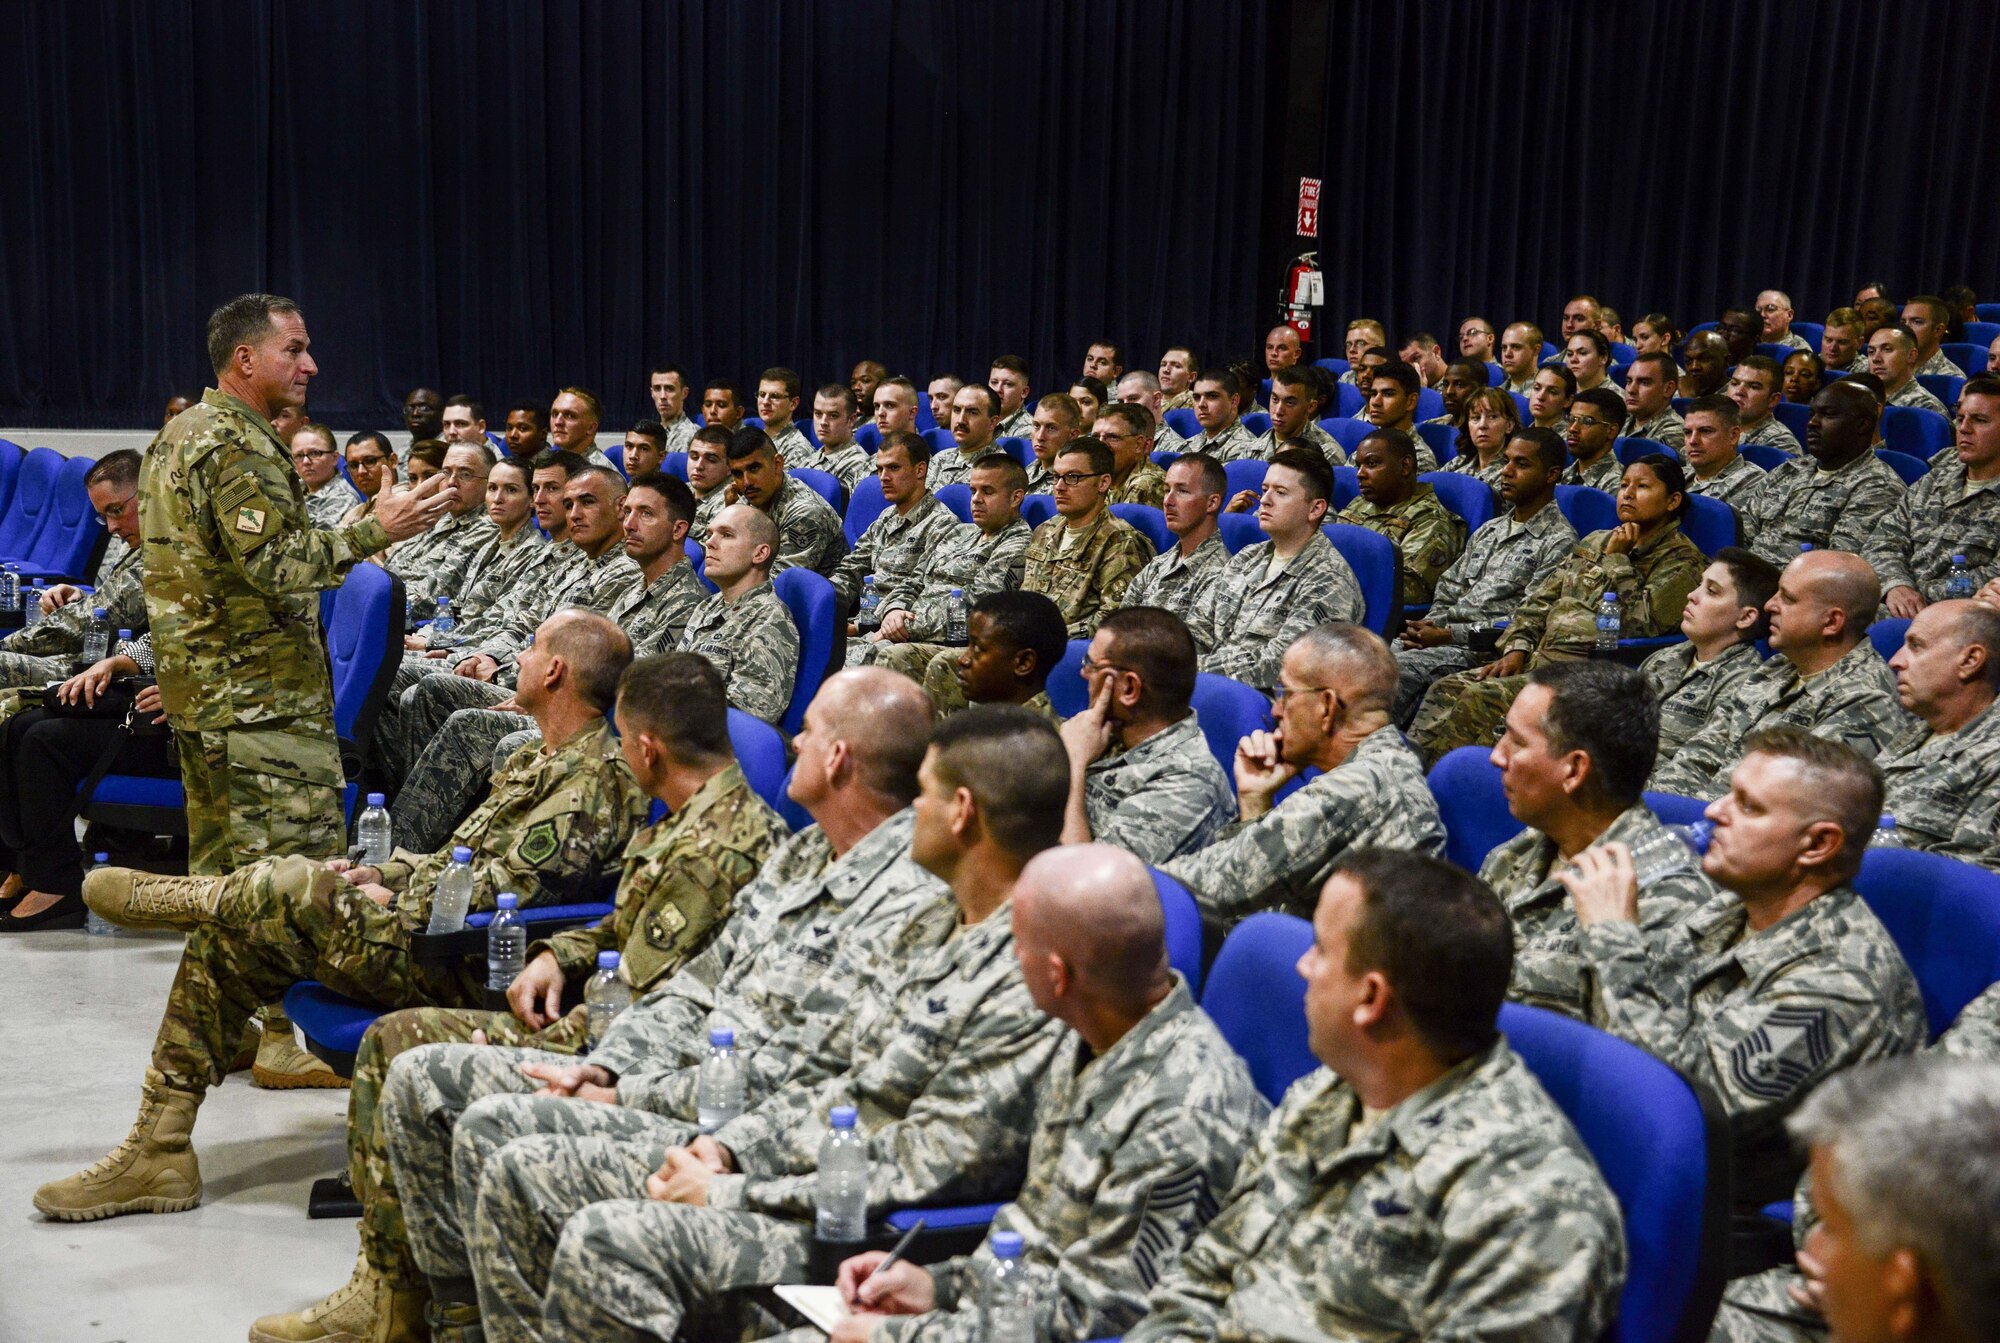 Chief of Staff of the Air Force Gen. David L. Goldfein addresses Airmen during an all-call Aug. 14, 2016, at Al Udeid Air Base, Qatar. Goldfein spoke with deployed Airmen about his top priorities, the future of the Air Force and the Airmen’s role in the ongoing fight against terrorism. (U.S. Air Force photo/Senior Airman Janelle Patiño/Released)